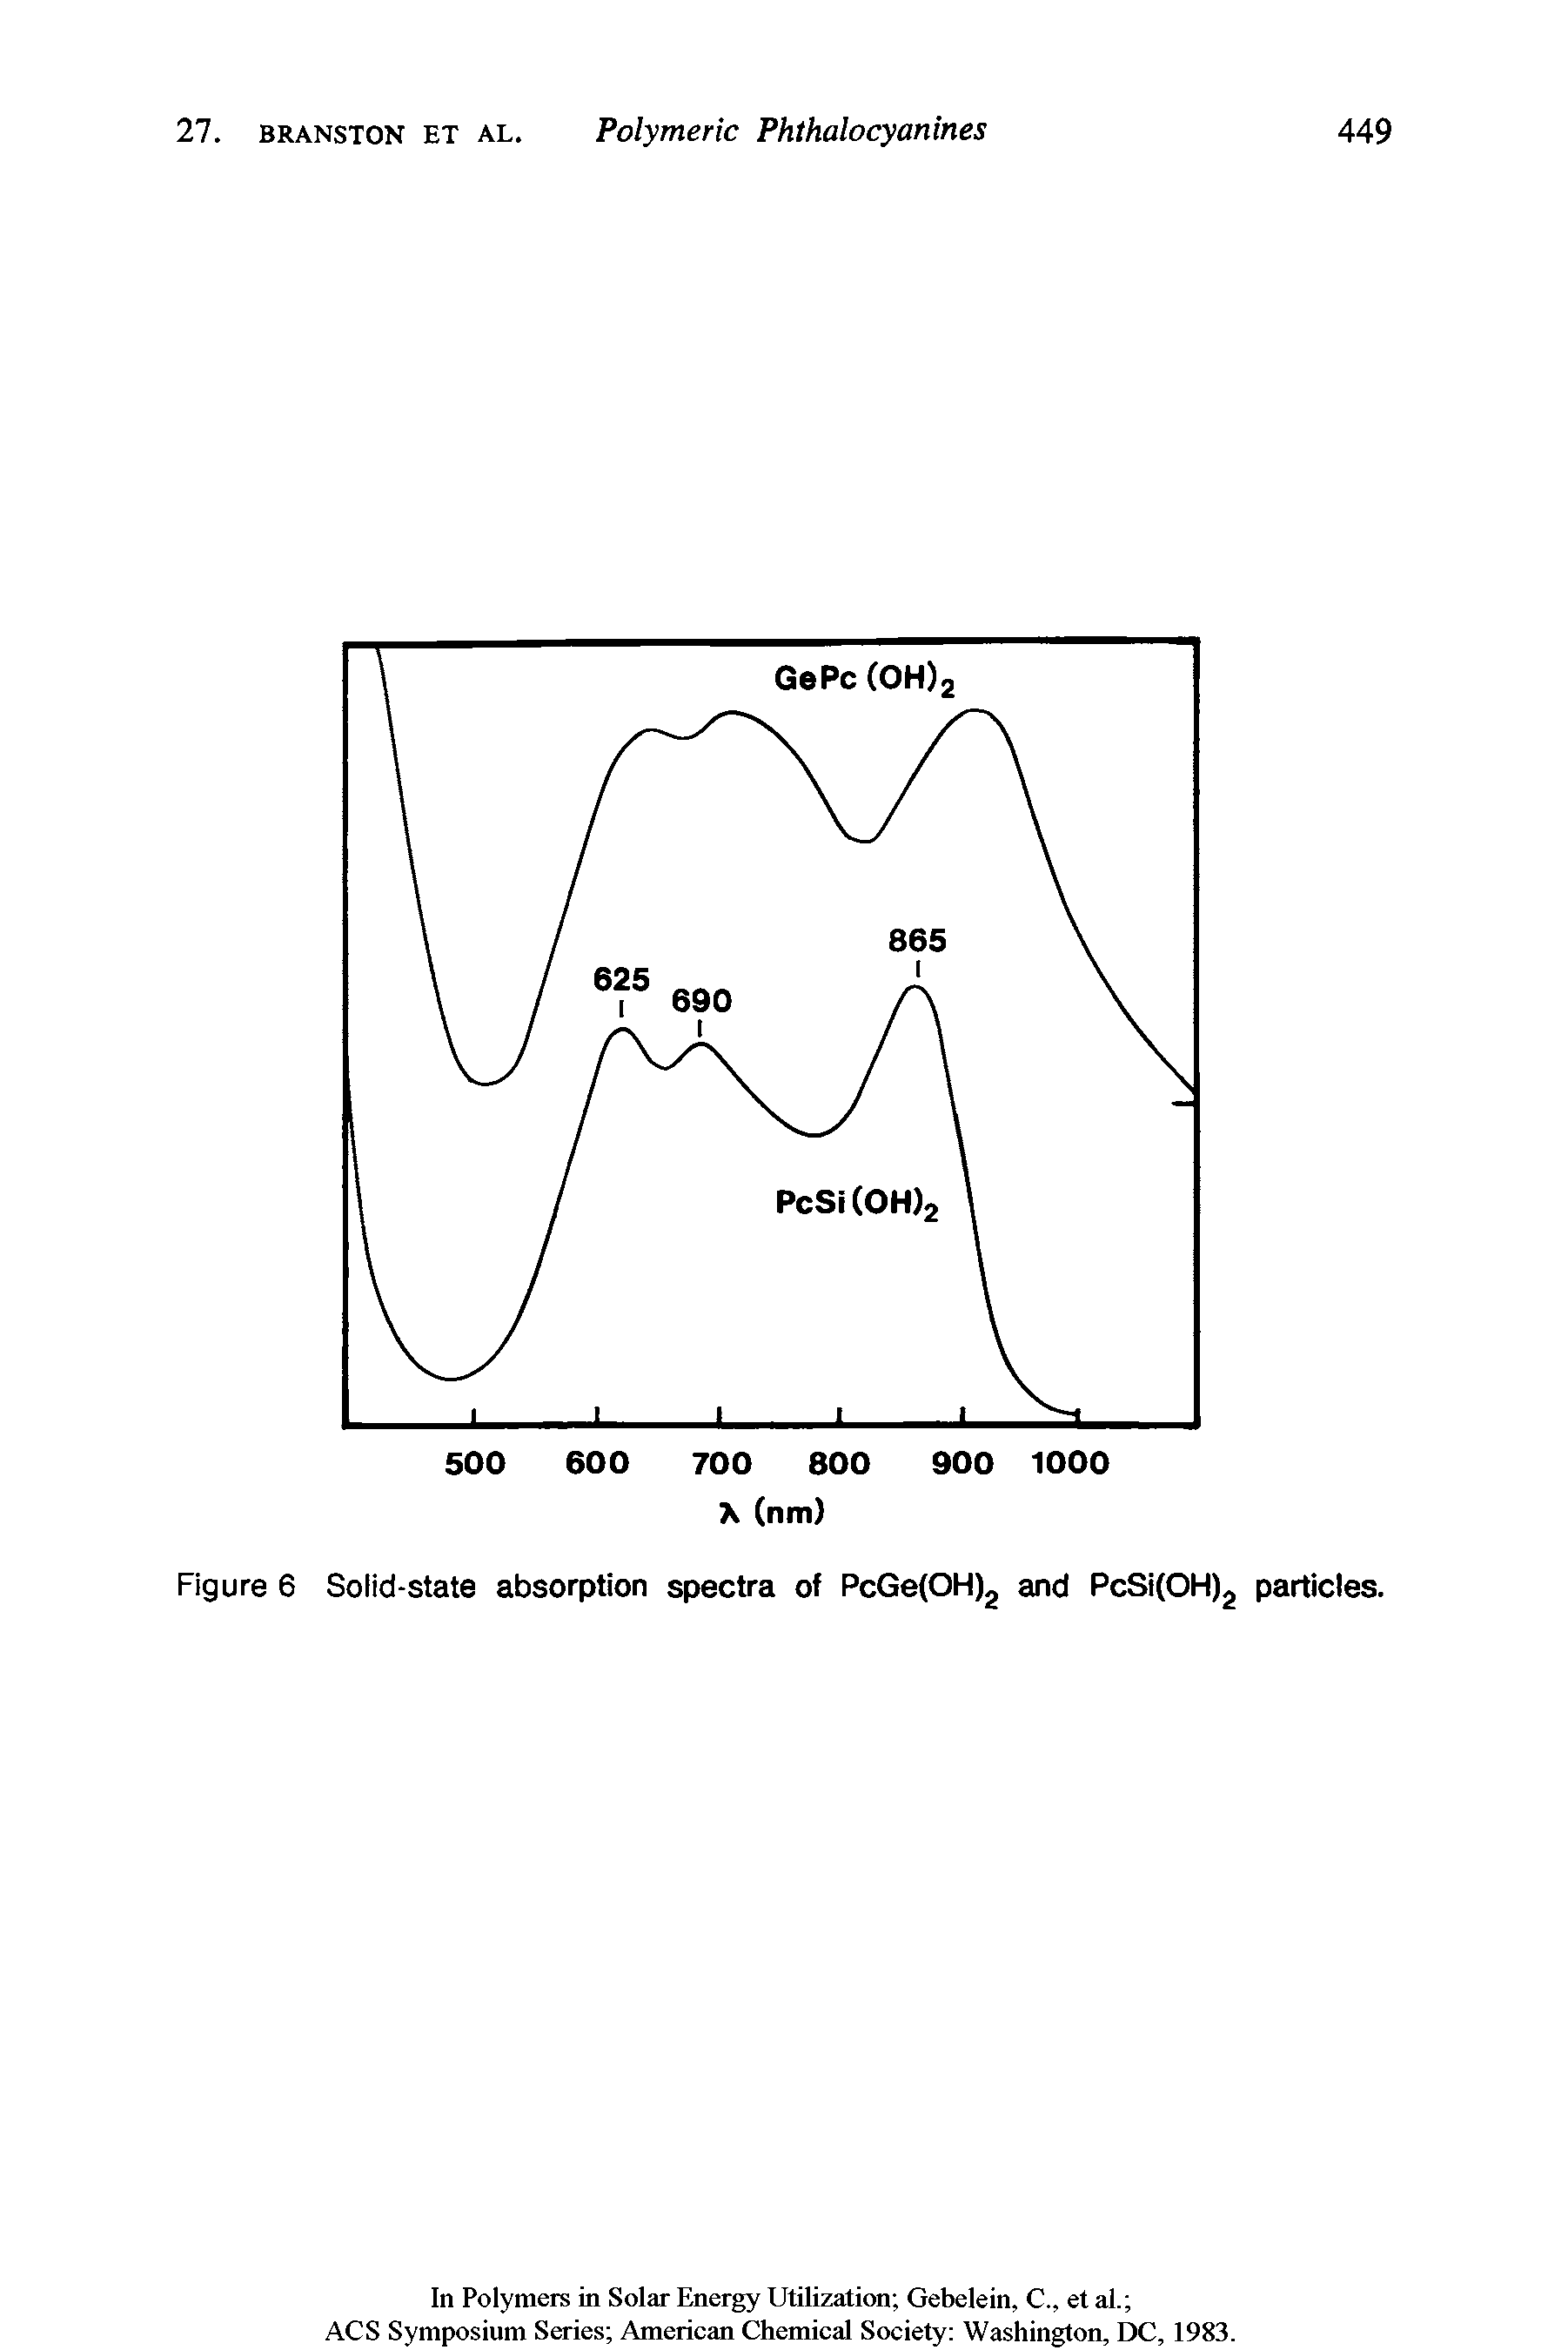 Figure 6 Solid-state absorption spectra of PcGe(OH) and PcSi(OH)j, particles.